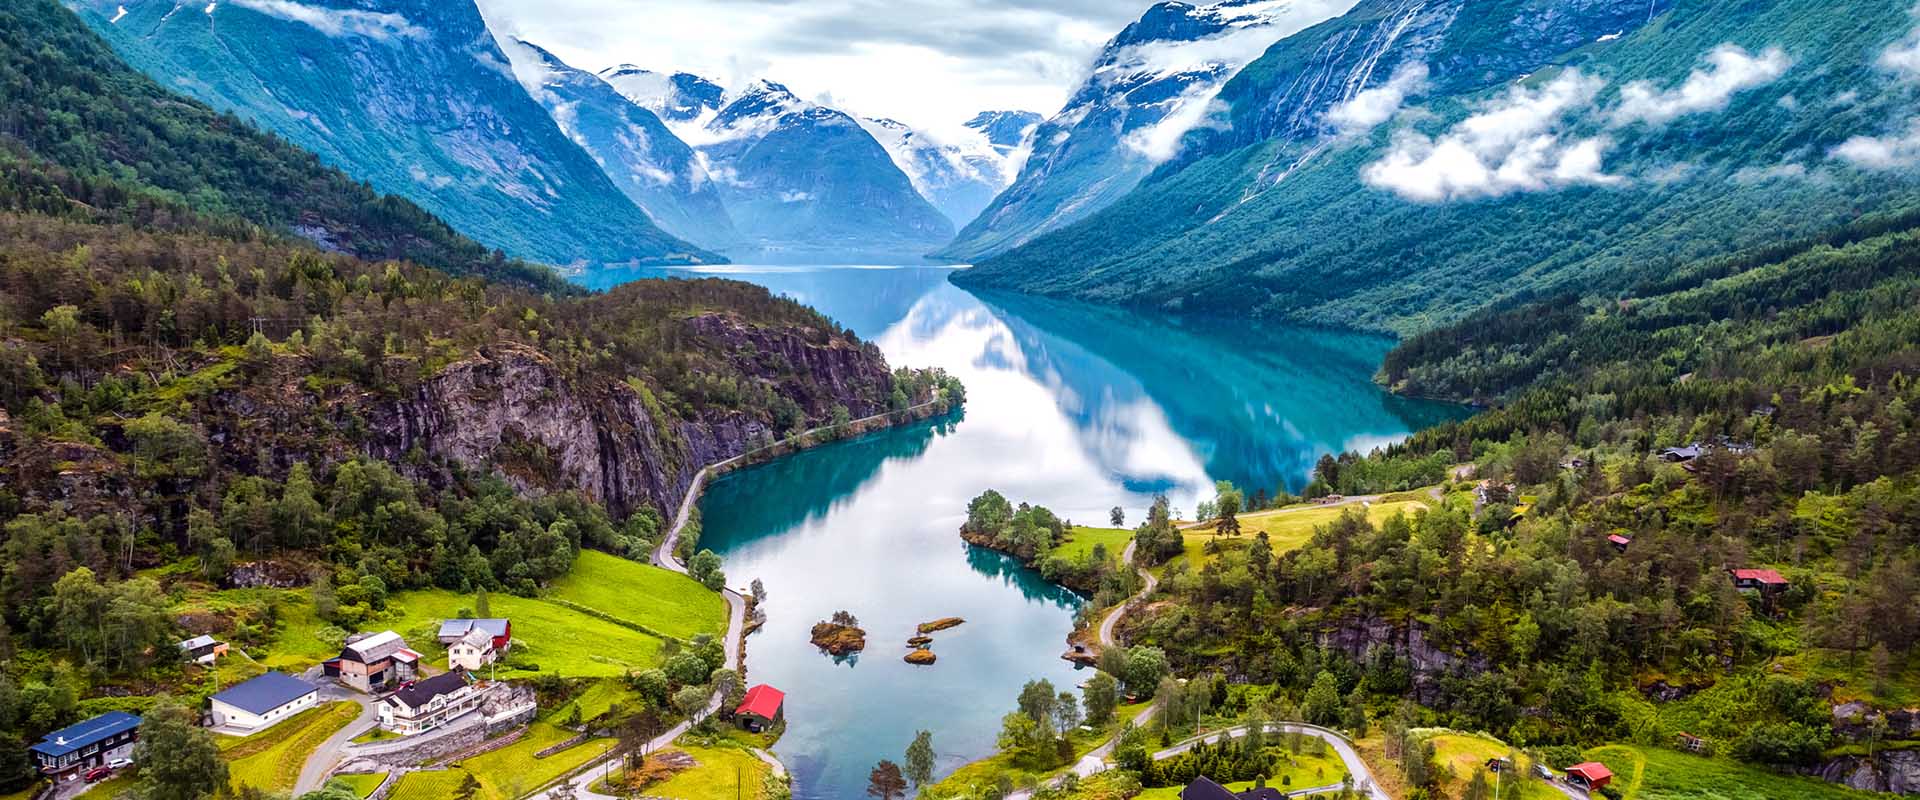 3 Cruises in Norway - LiveAboard.com